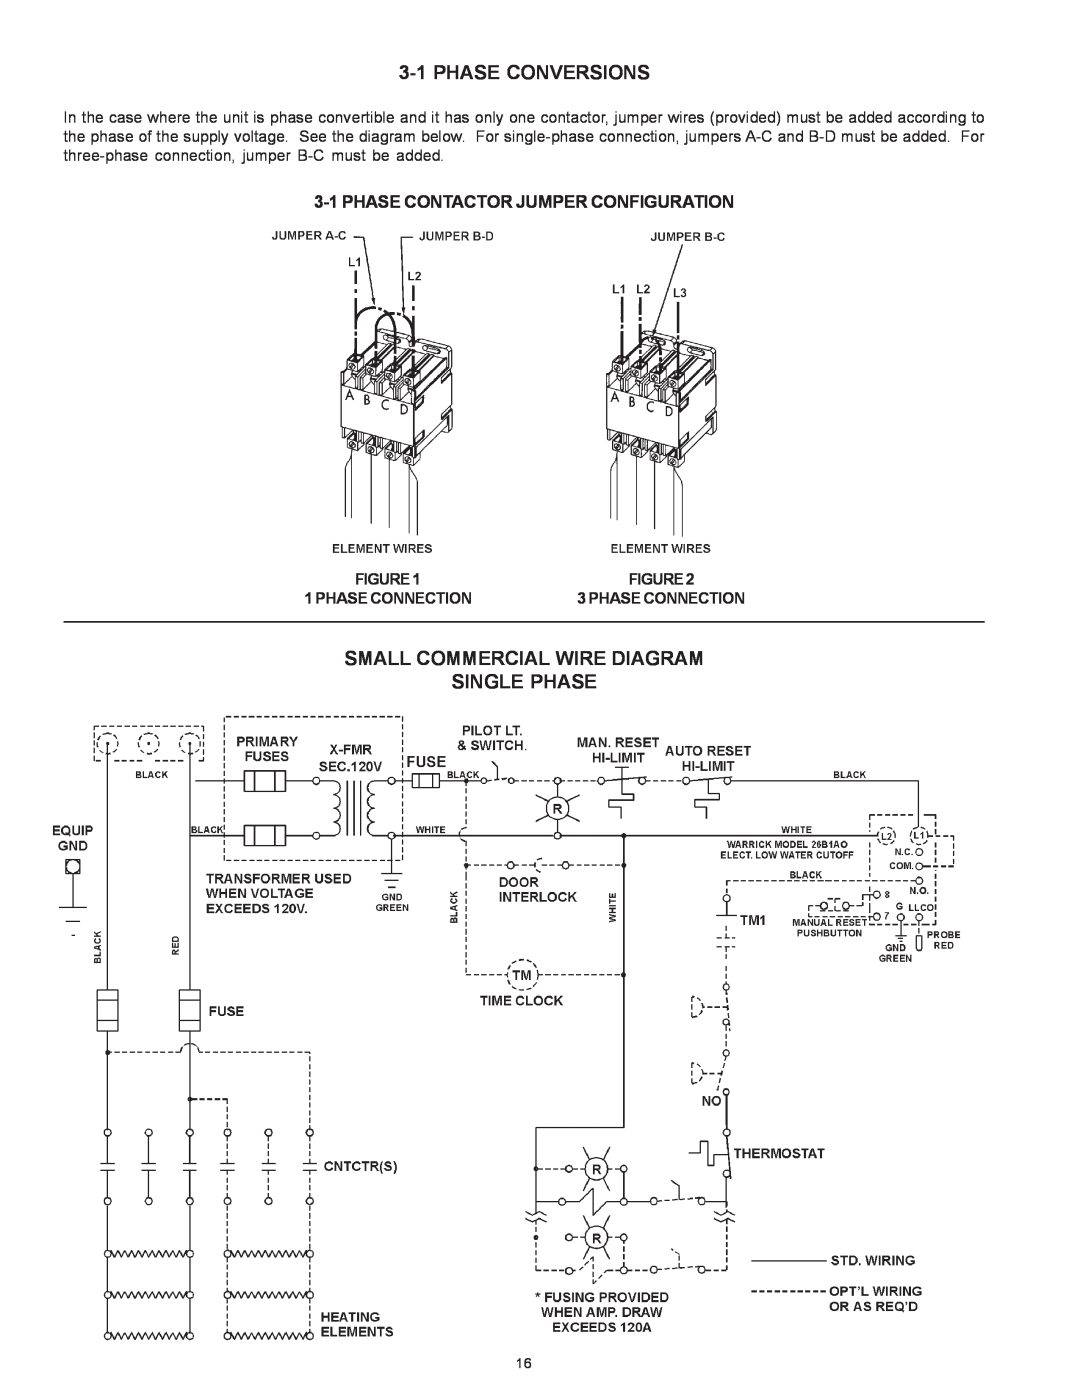 State Industries SSE-5 Phase Conversions, Small Commercial Wire Diagram Single Phase, Phase Contactor Jumper Configuration 